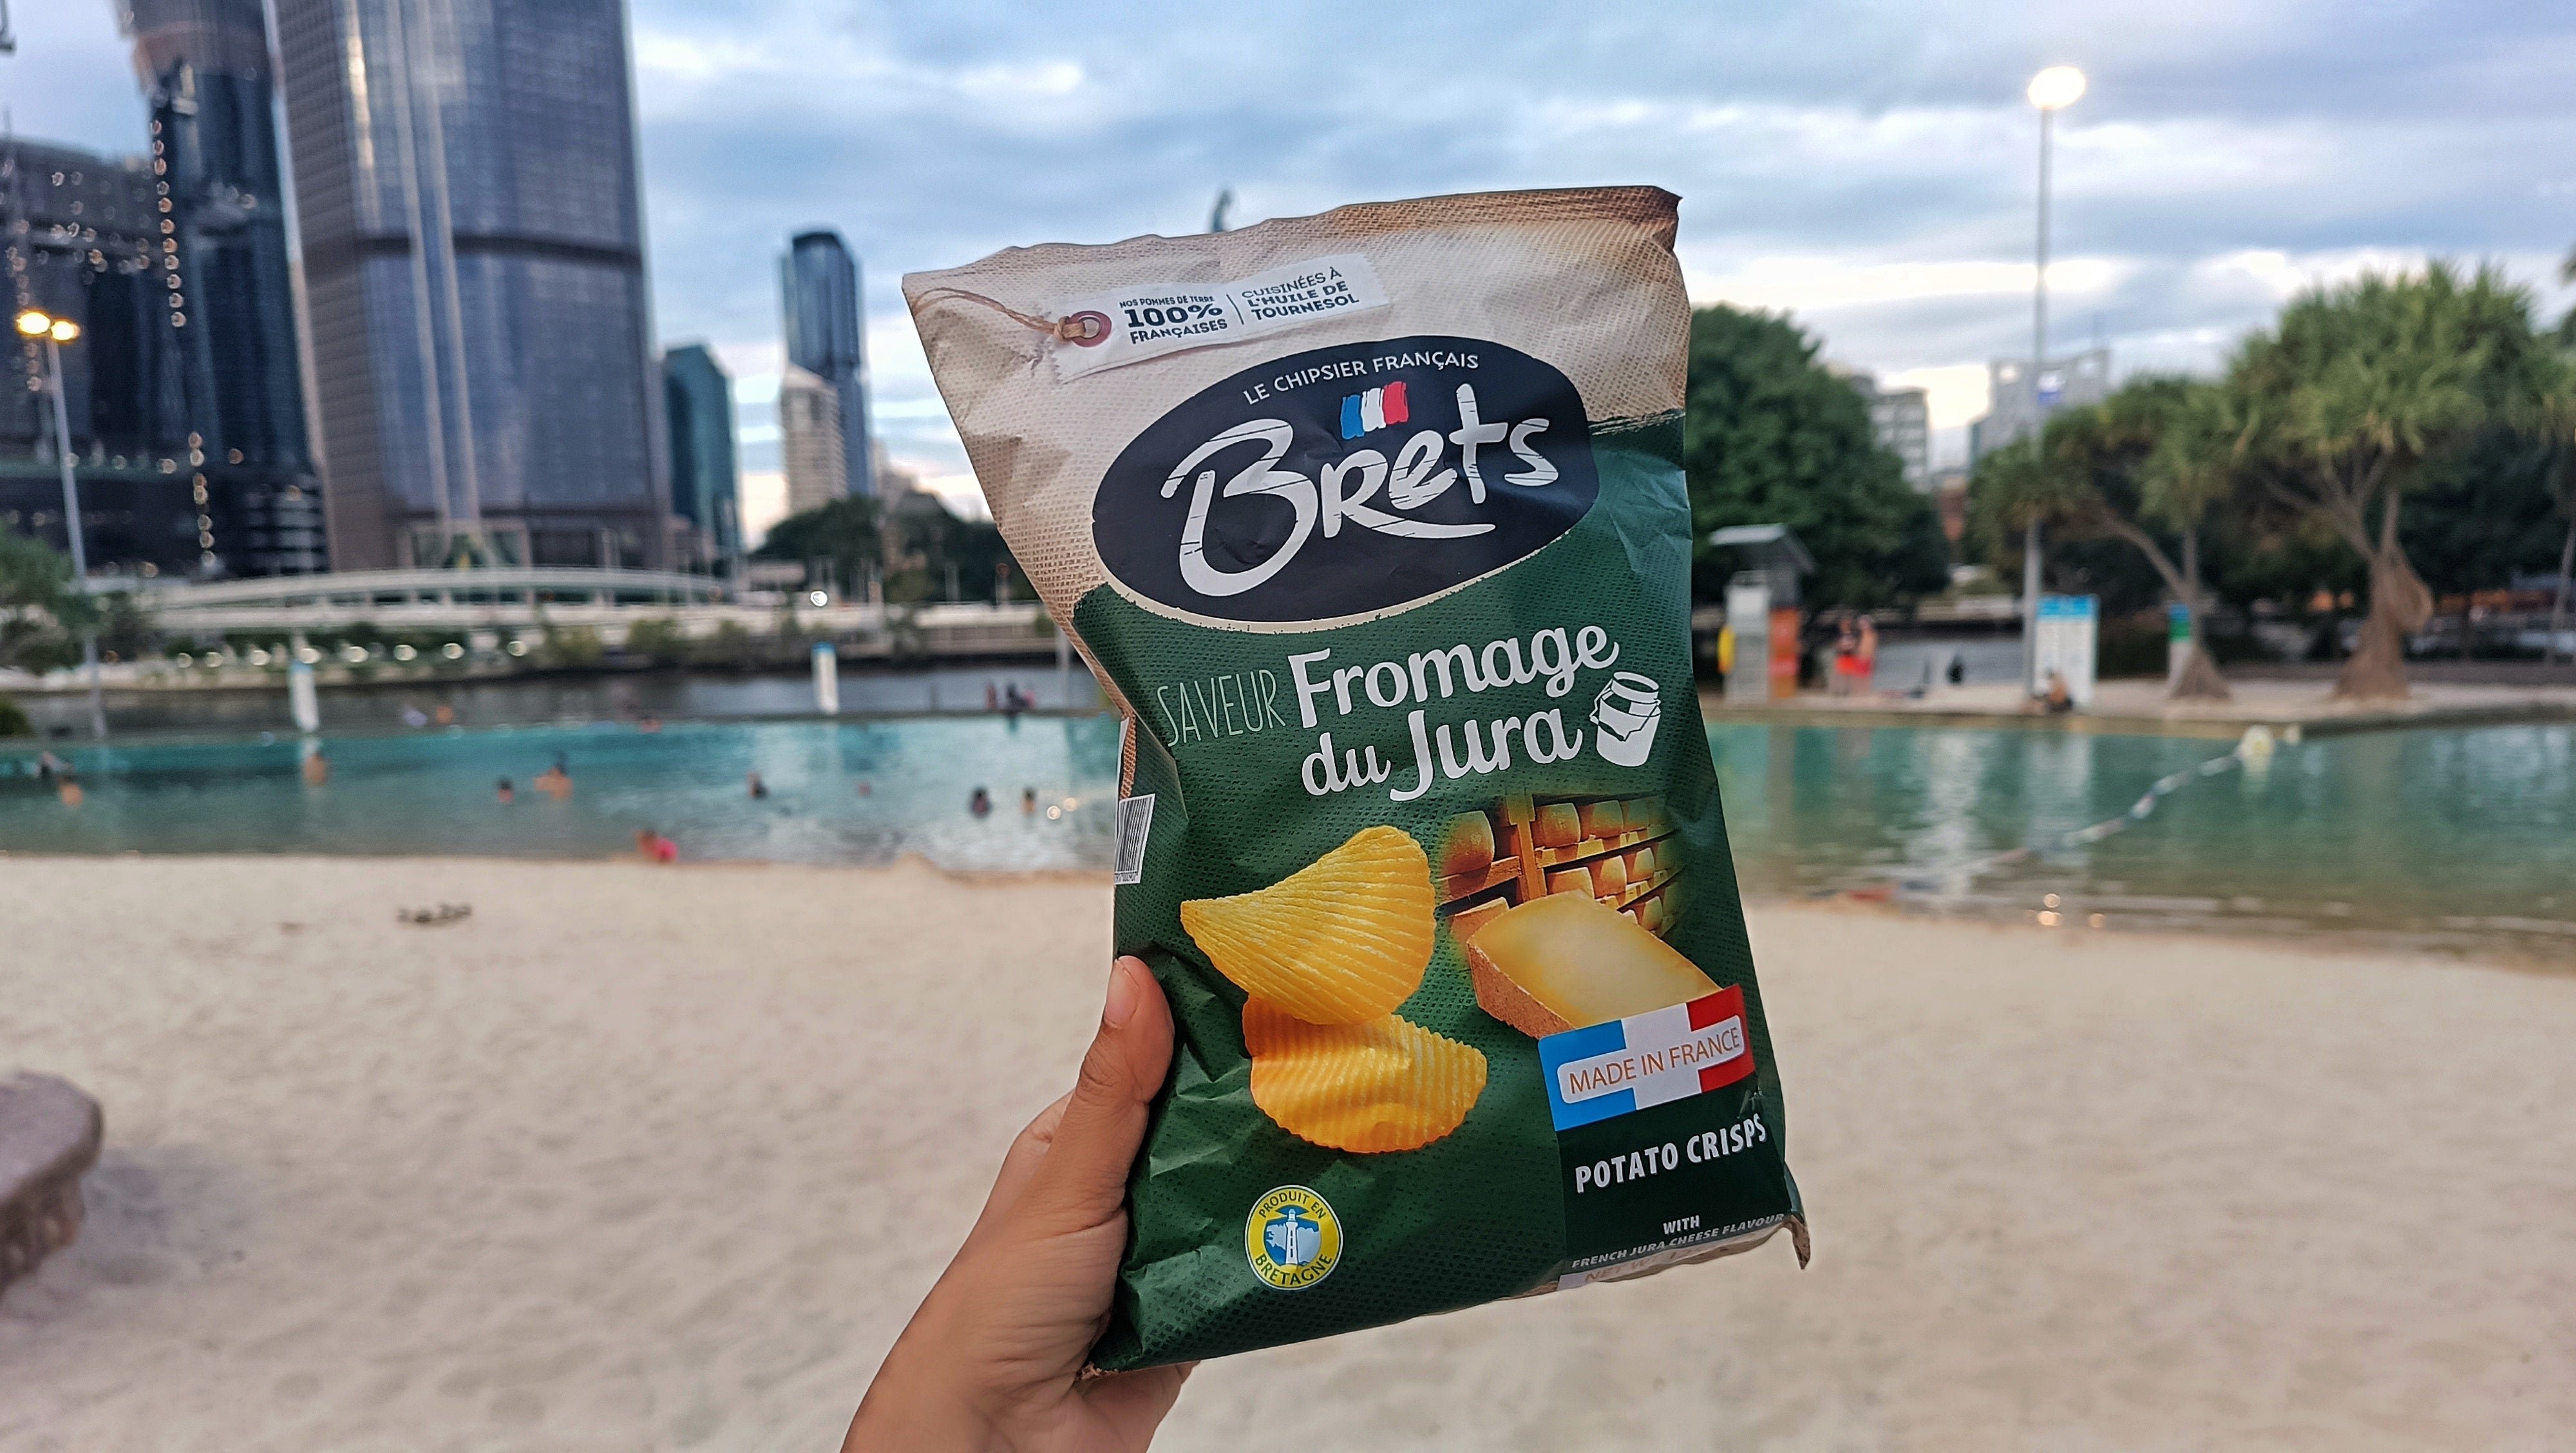 The Italian Store - Our collection of Brets chips made in France have some  new flavours in the mix – Indian Curry, Gouda and Cumin, and Camembert are  just a few!